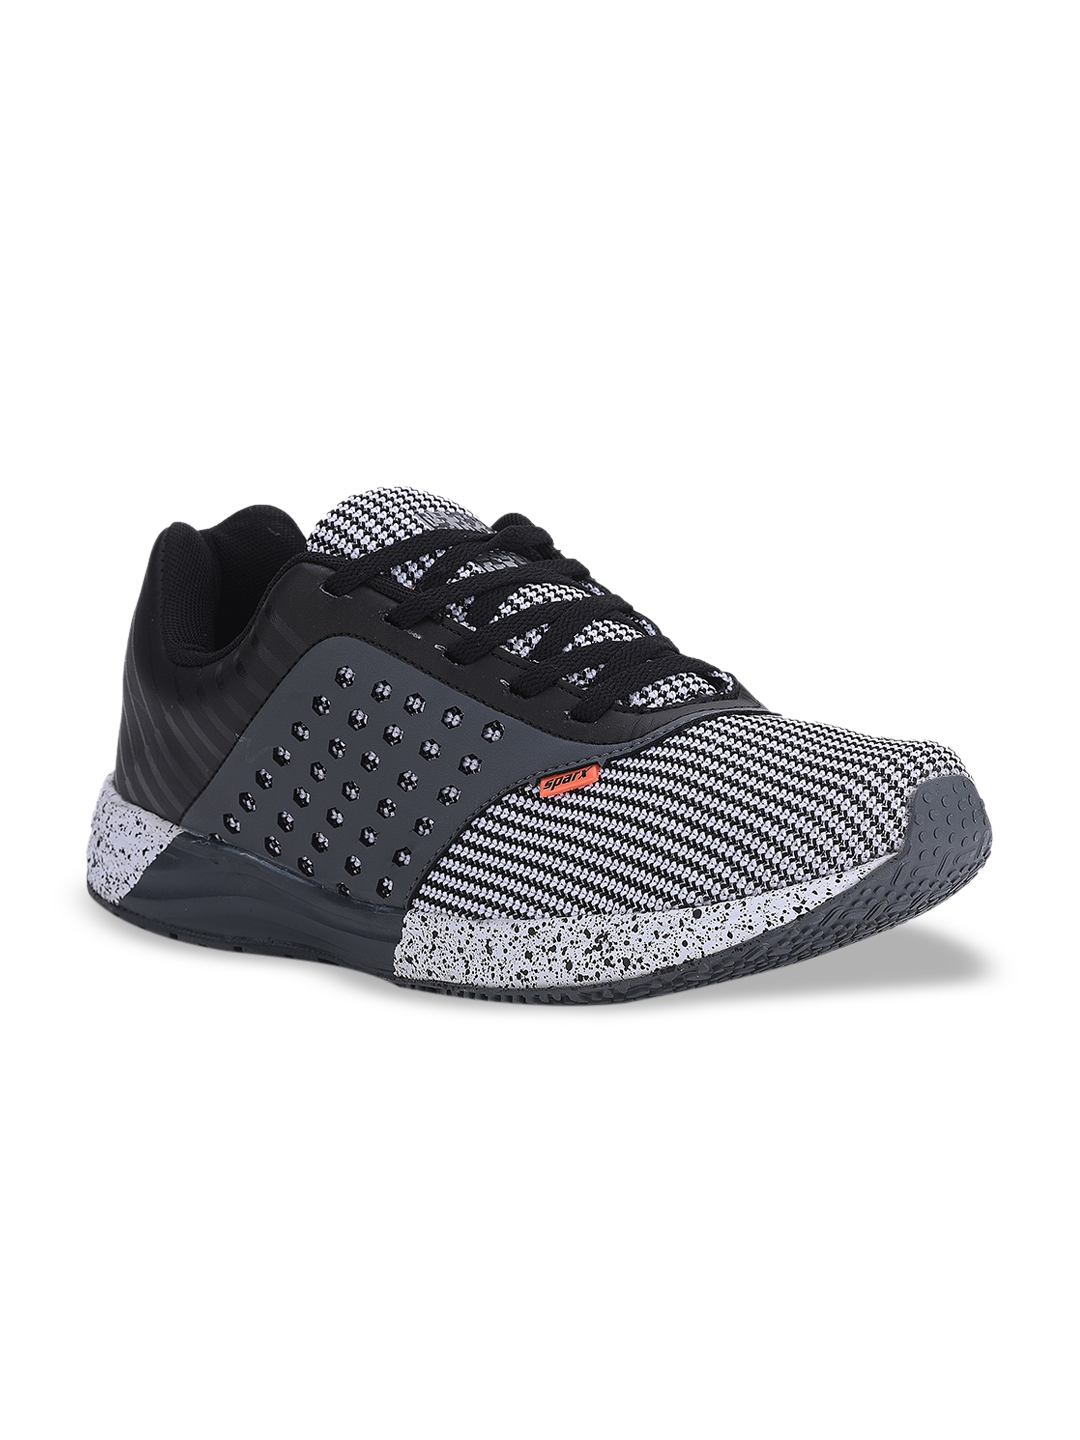 Buy Sparx Men Grey Woven Design Running Shoes - Sports Shoes for Men ...